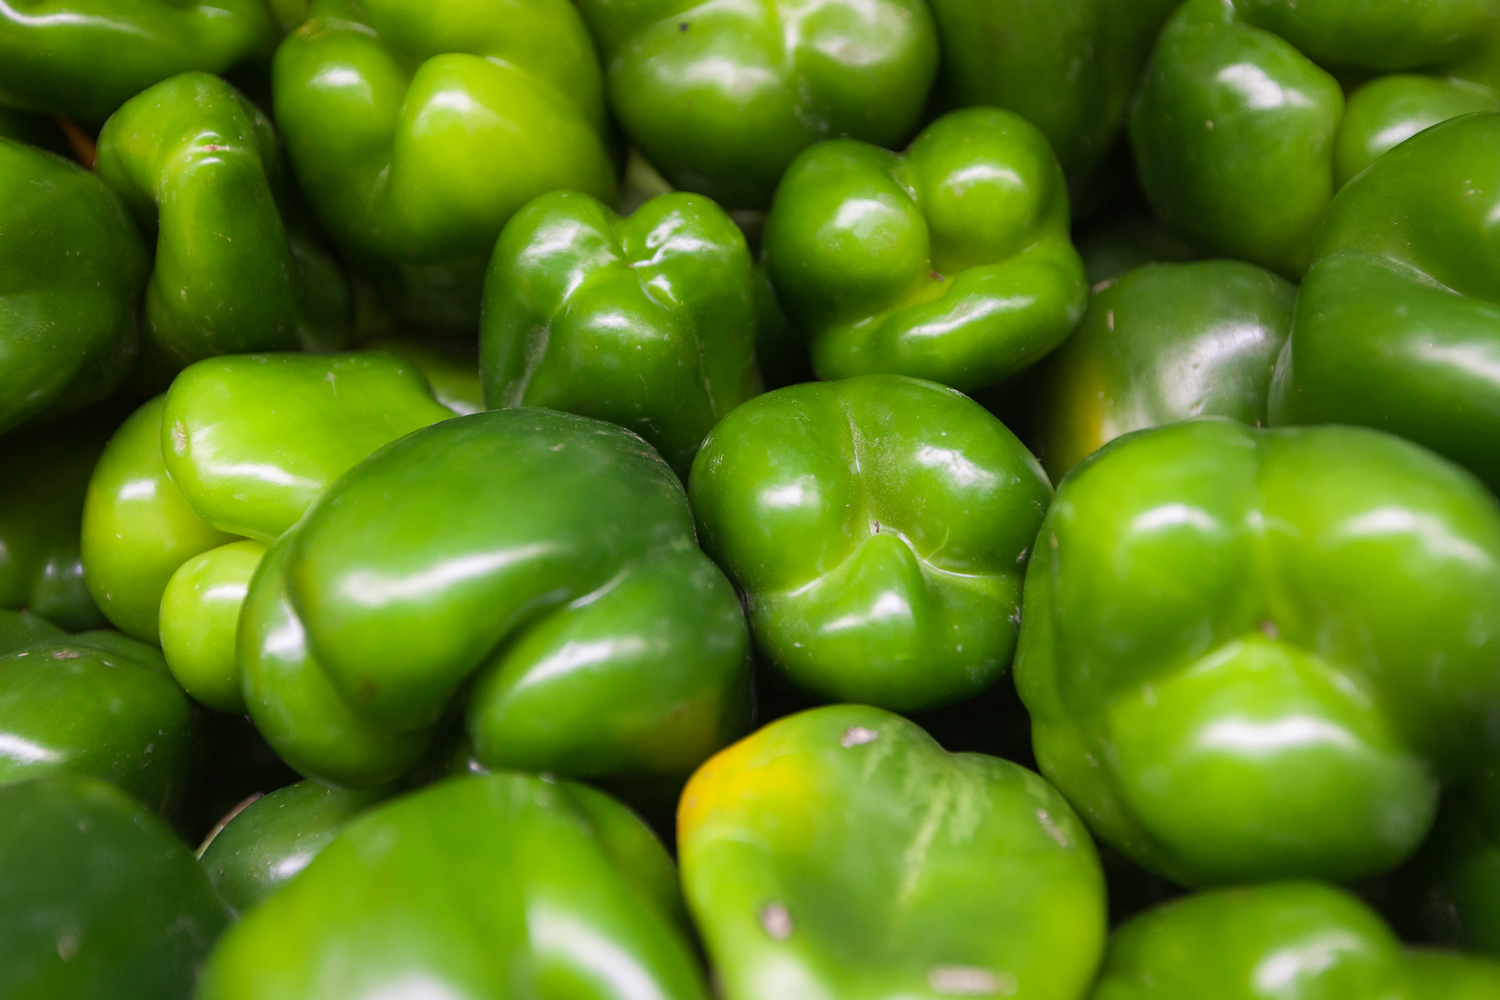 green-bell-peppers-produce-department-mana-foods.jpg